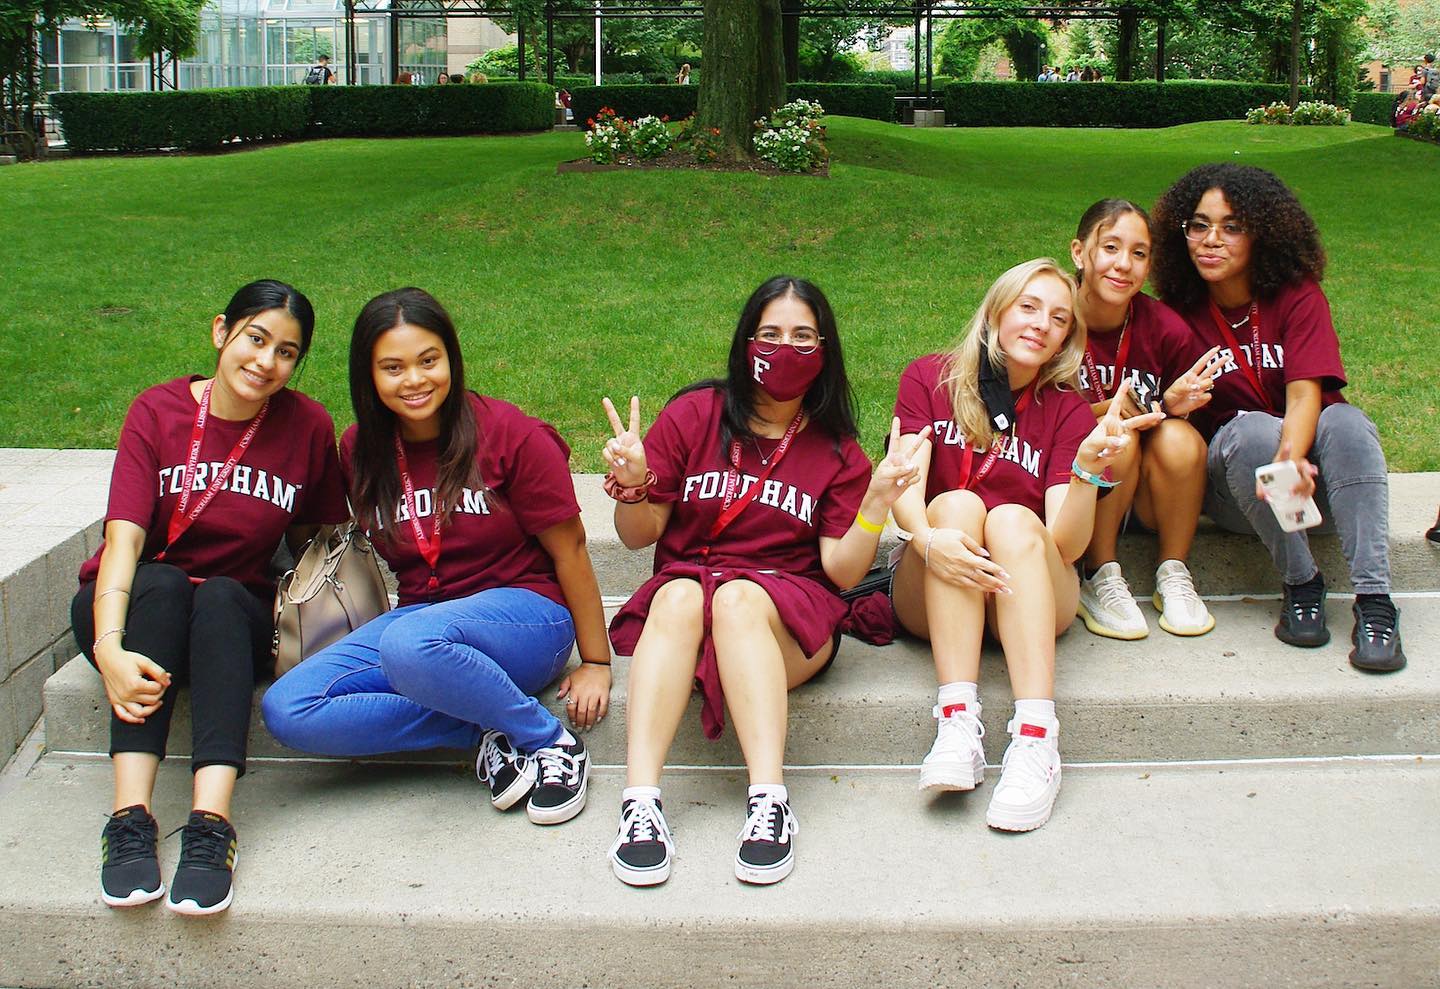 Hi #Fordham2026, get ready for your first year by checking out the Office of Information Technology’s website. We have a variety of tech resources for incoming students! https://itnews.blog.fordham.edu/three-top-tech-resources-for-first-year-students/